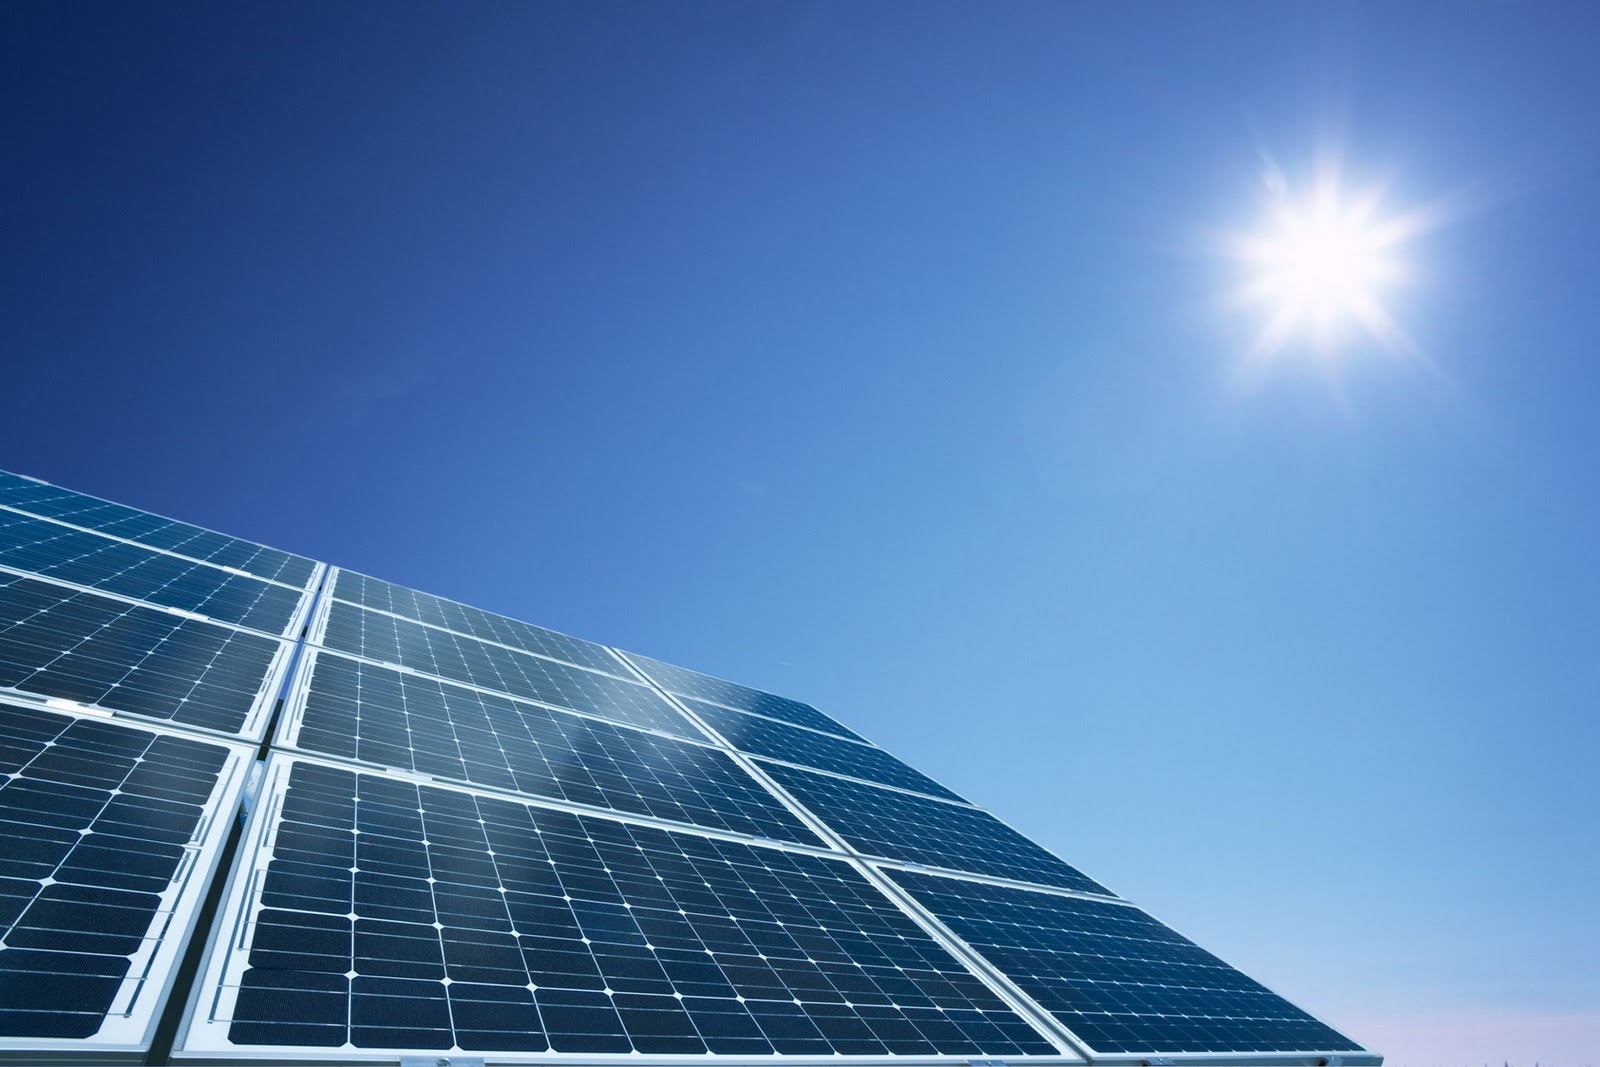 The NY-Sun Incentive Program for Solar Photovoltaic Systems